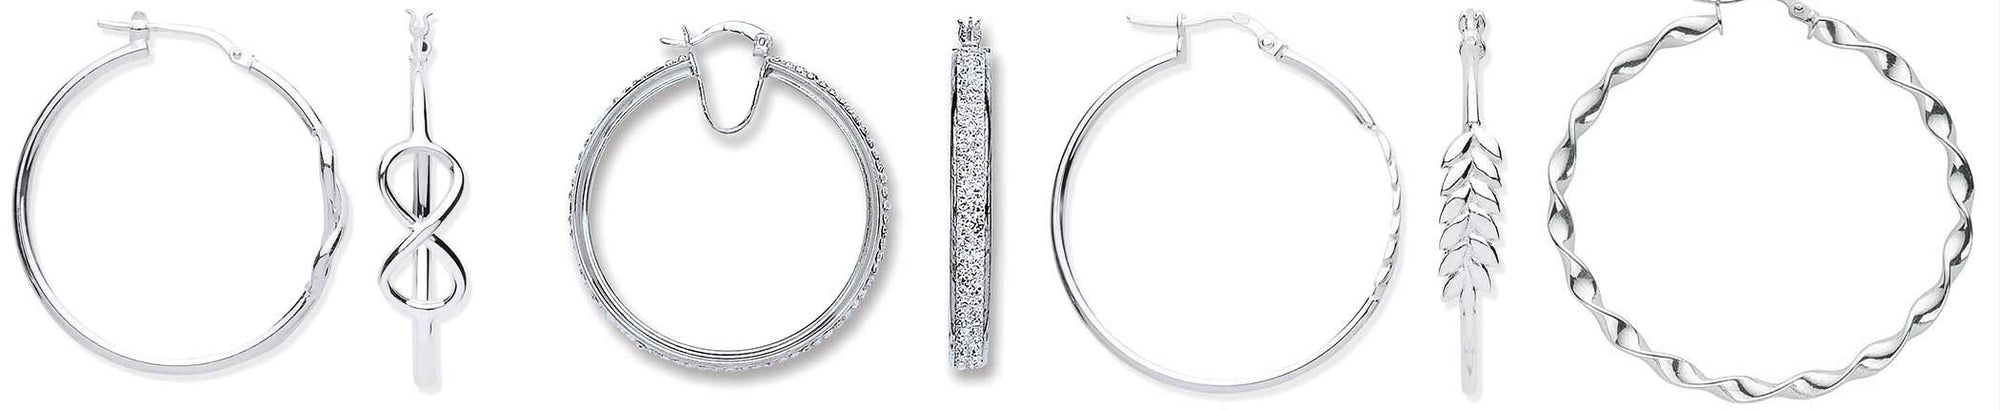 <font color=#000000>11 ways to style large silver hoop earrings</font>